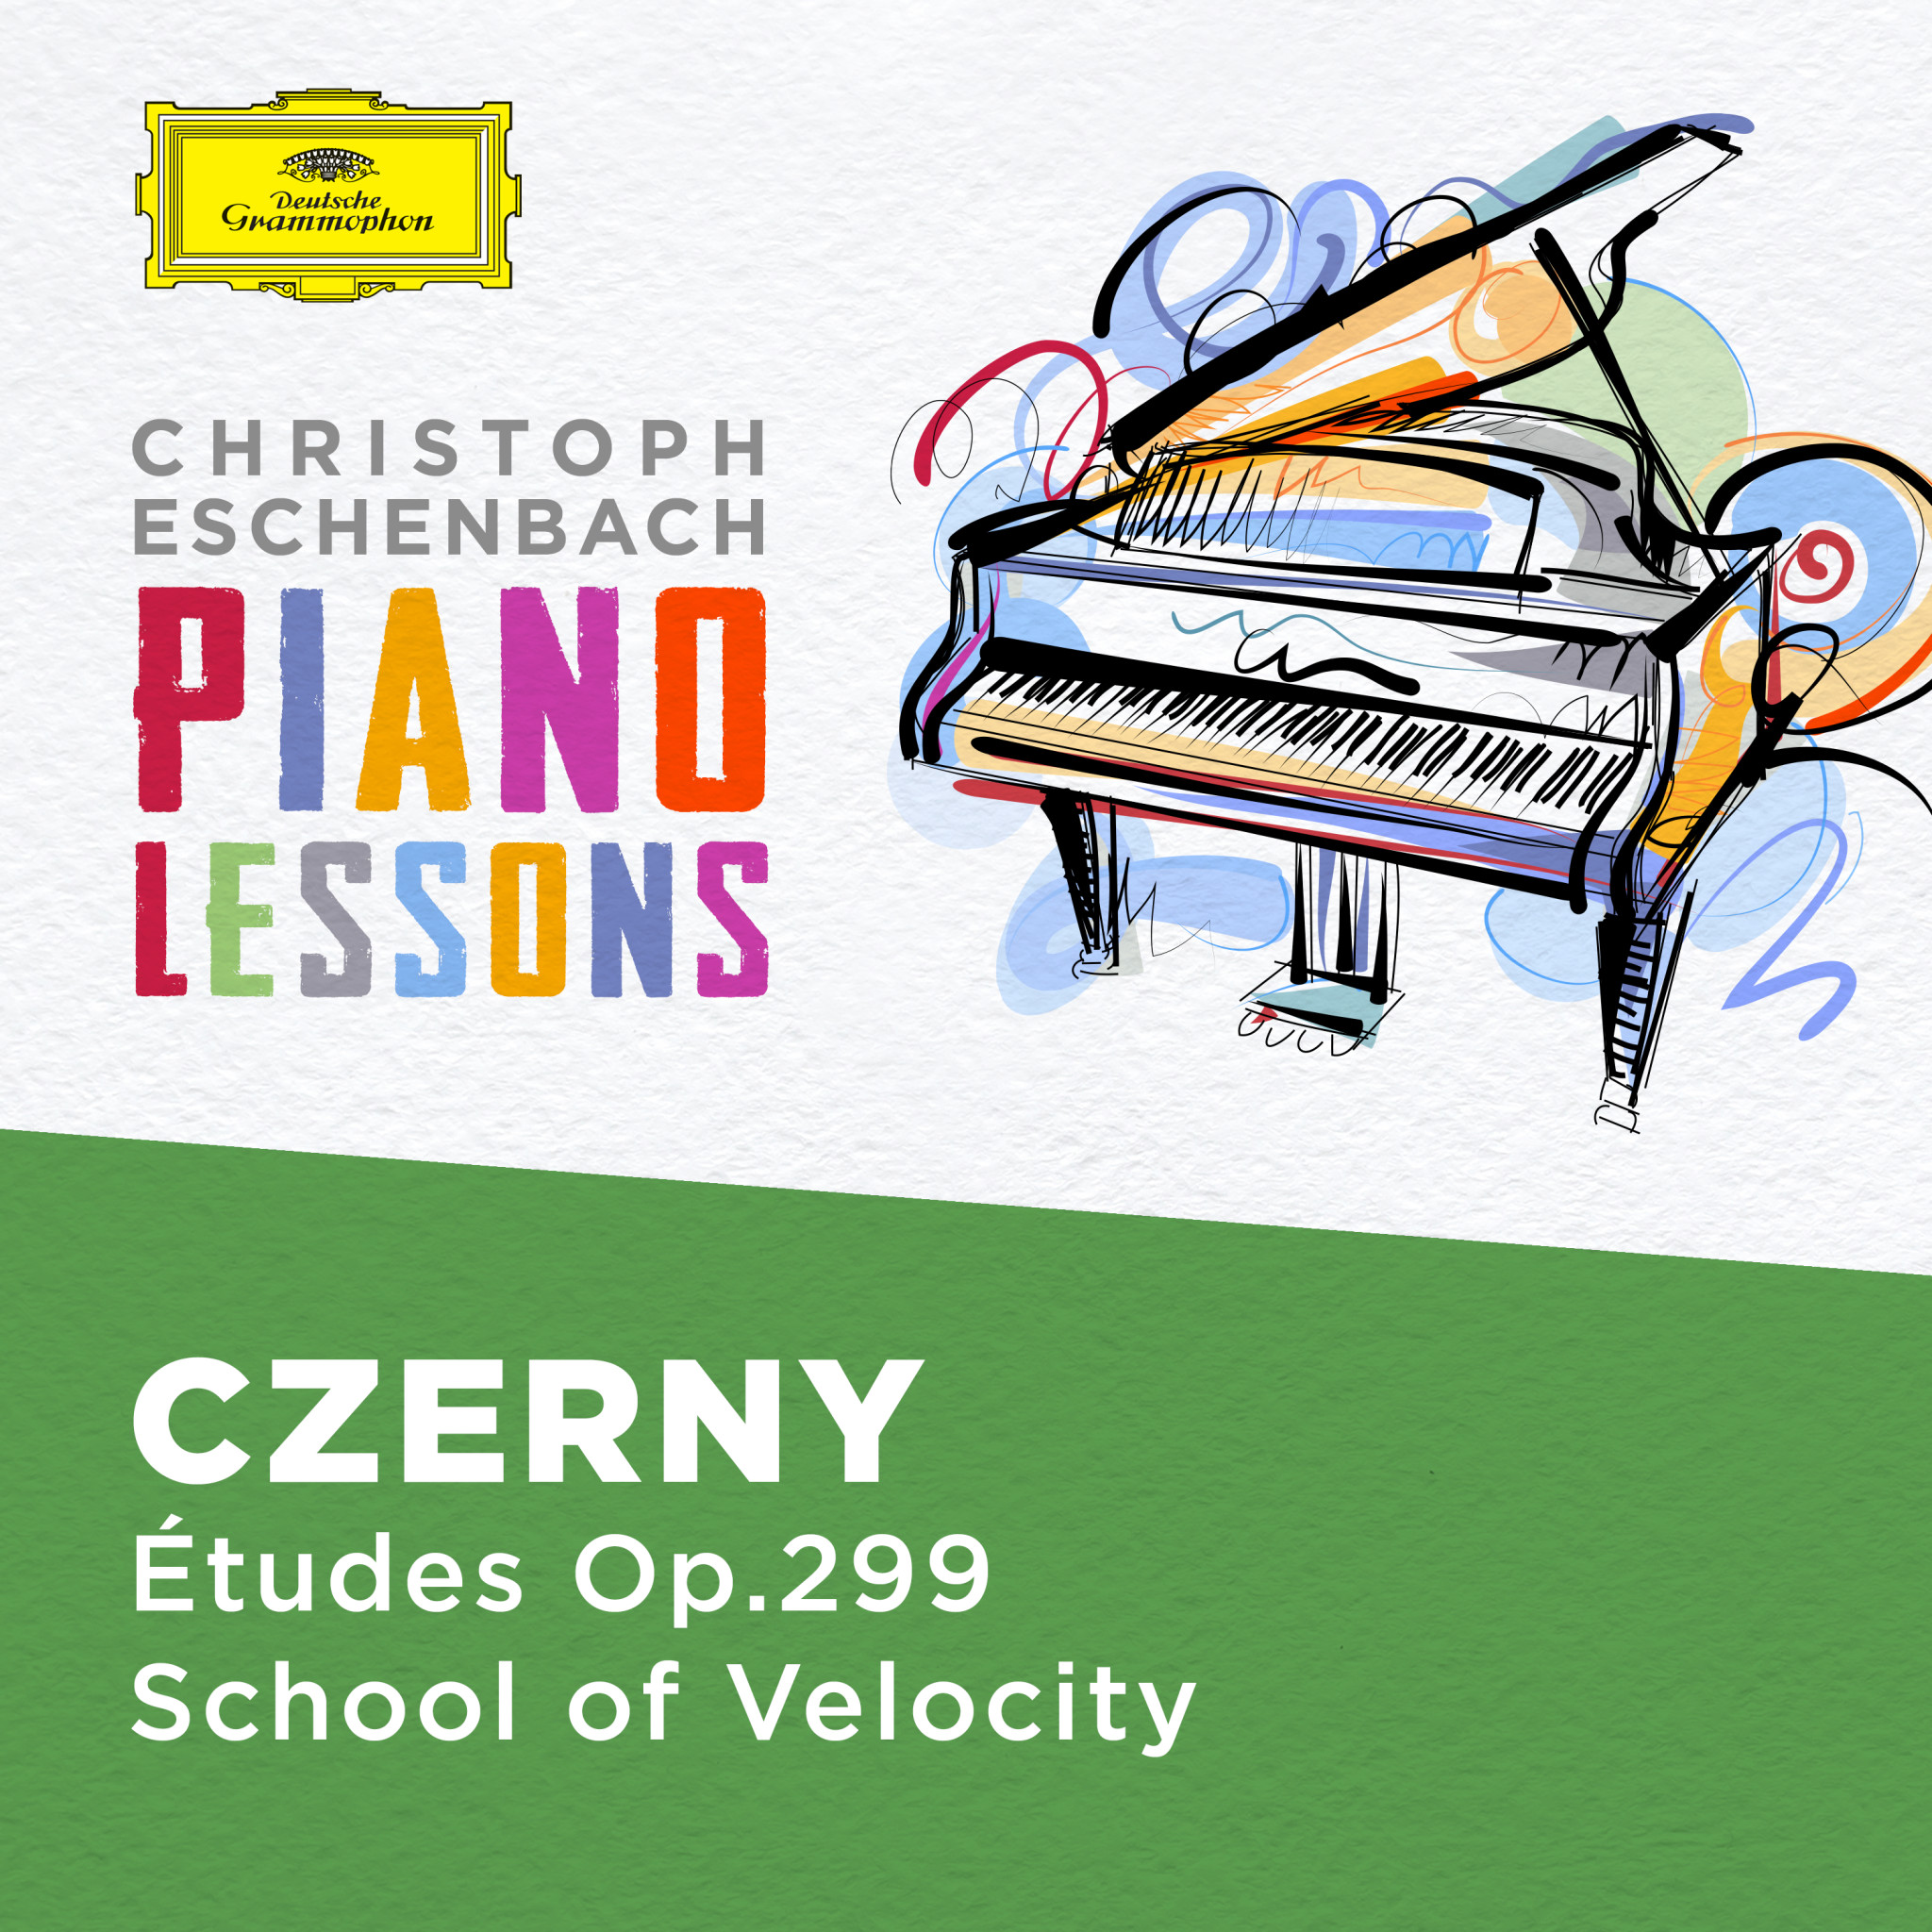 Christoph Eschenbach Piano Lessons - Czerny: 40 Etudes, Op. 299 The School of Velocity